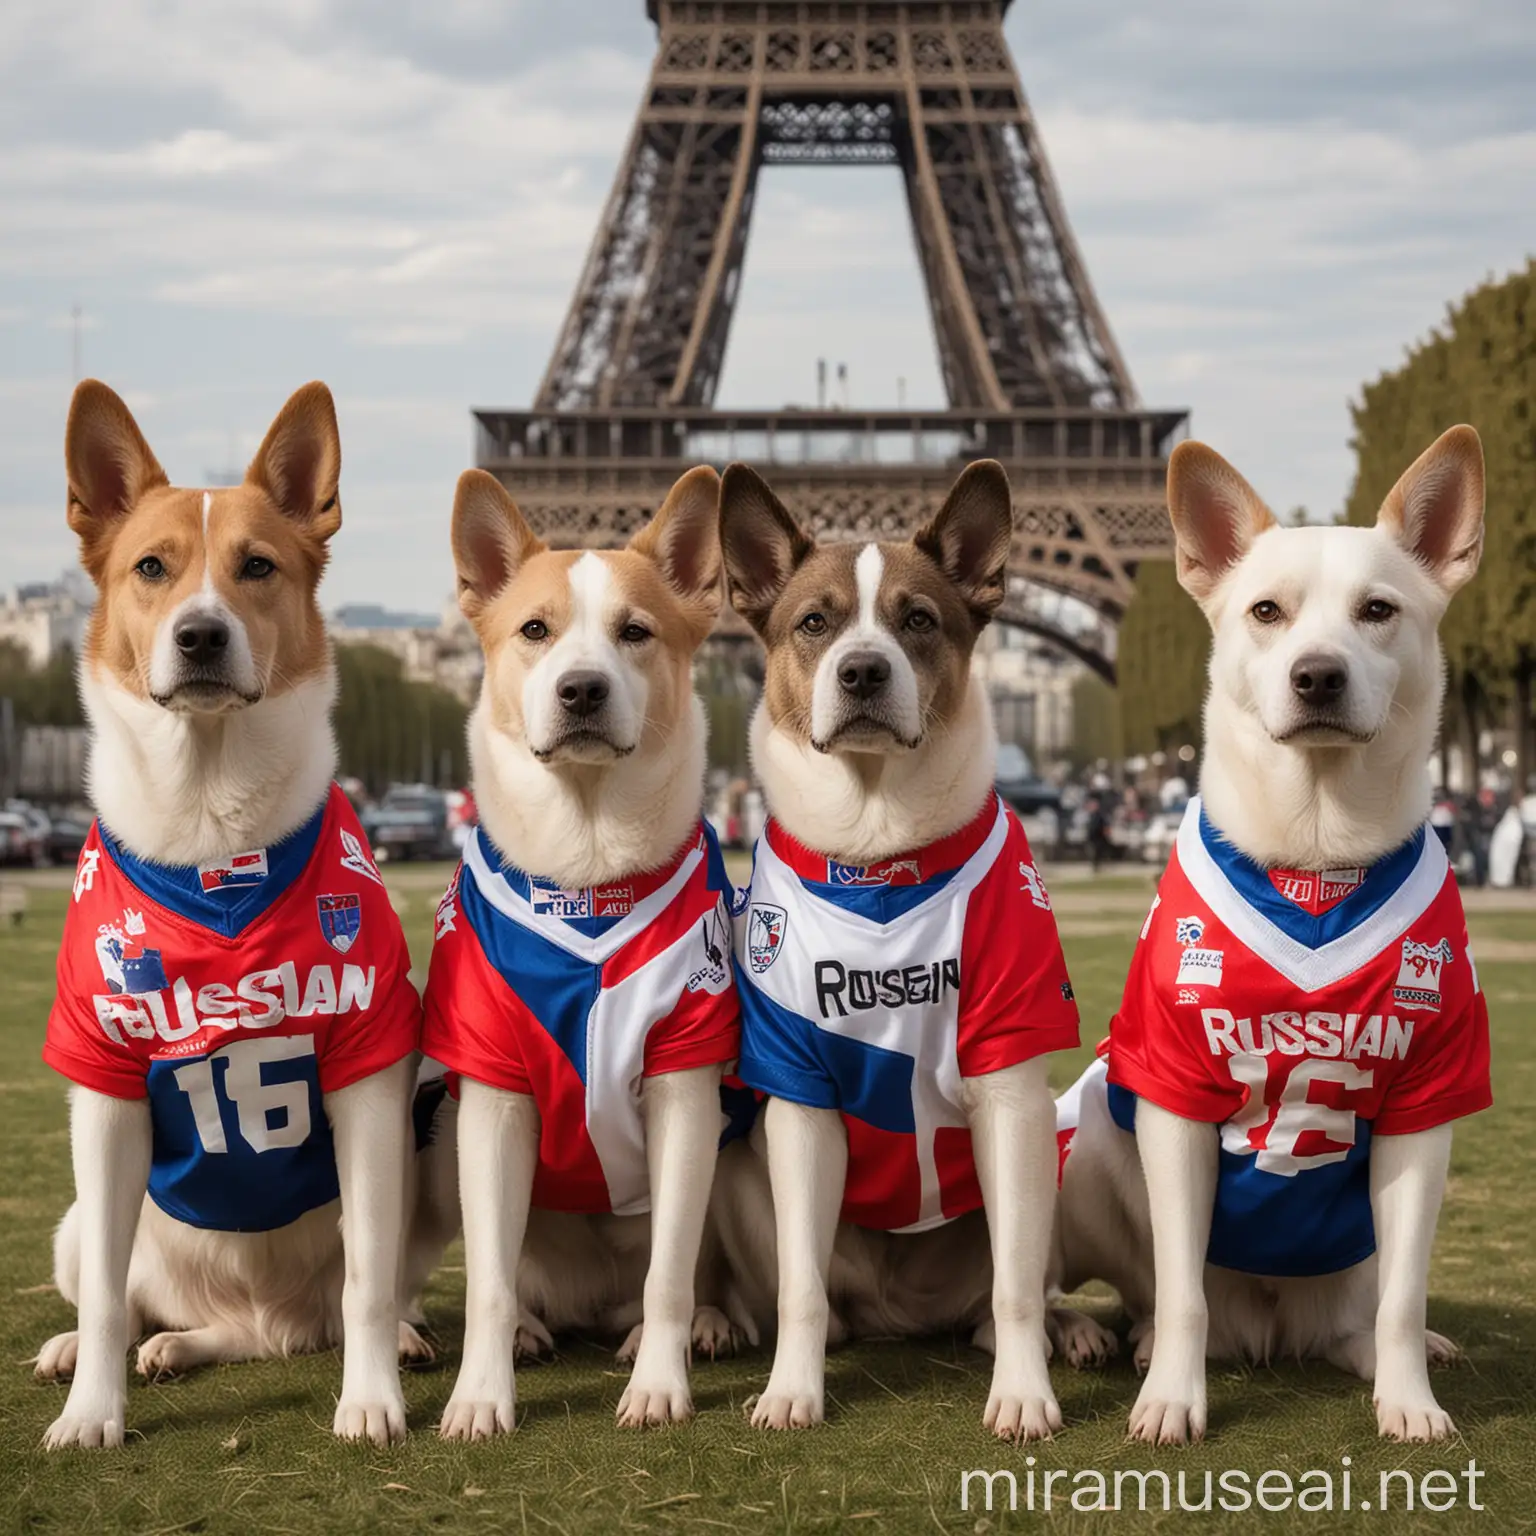 a group of dogs wearing jerseys with the russian flag,eiffel tower as backgound

